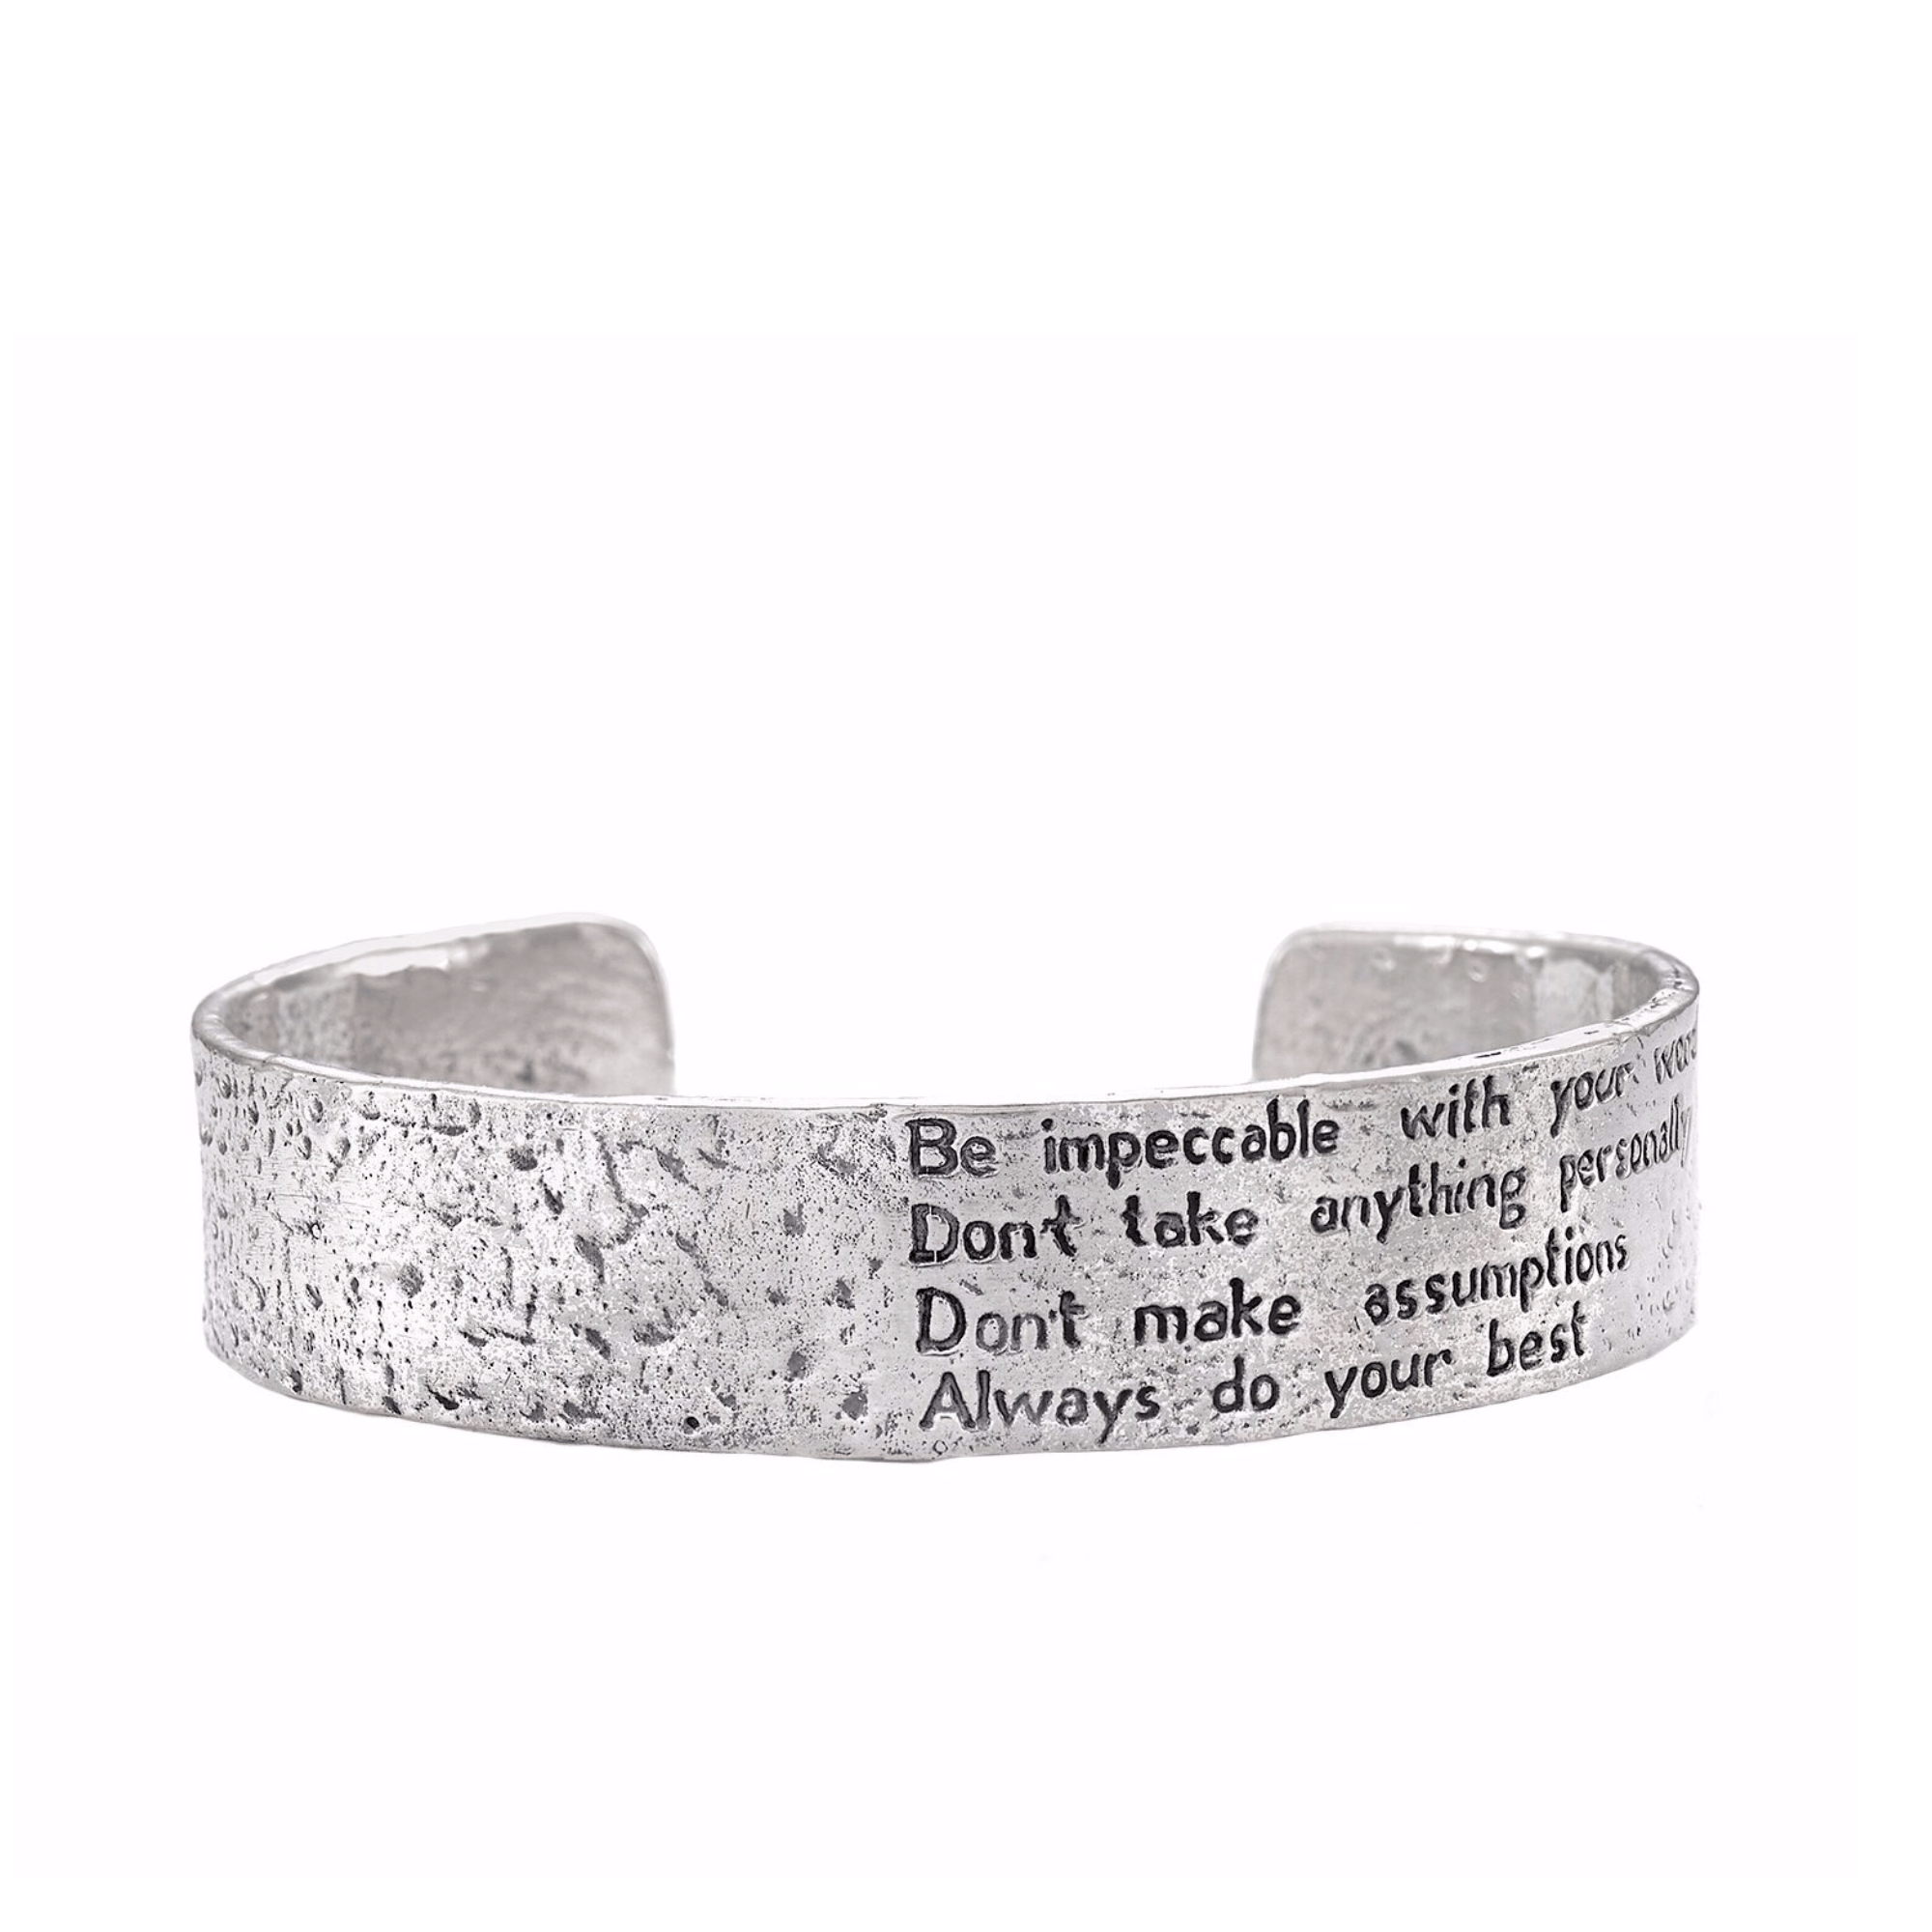 Jewelry Evolution Bracelet Small / Sterling Silver / Antiqued Texture The Four Agreements Matte Textured Cuff